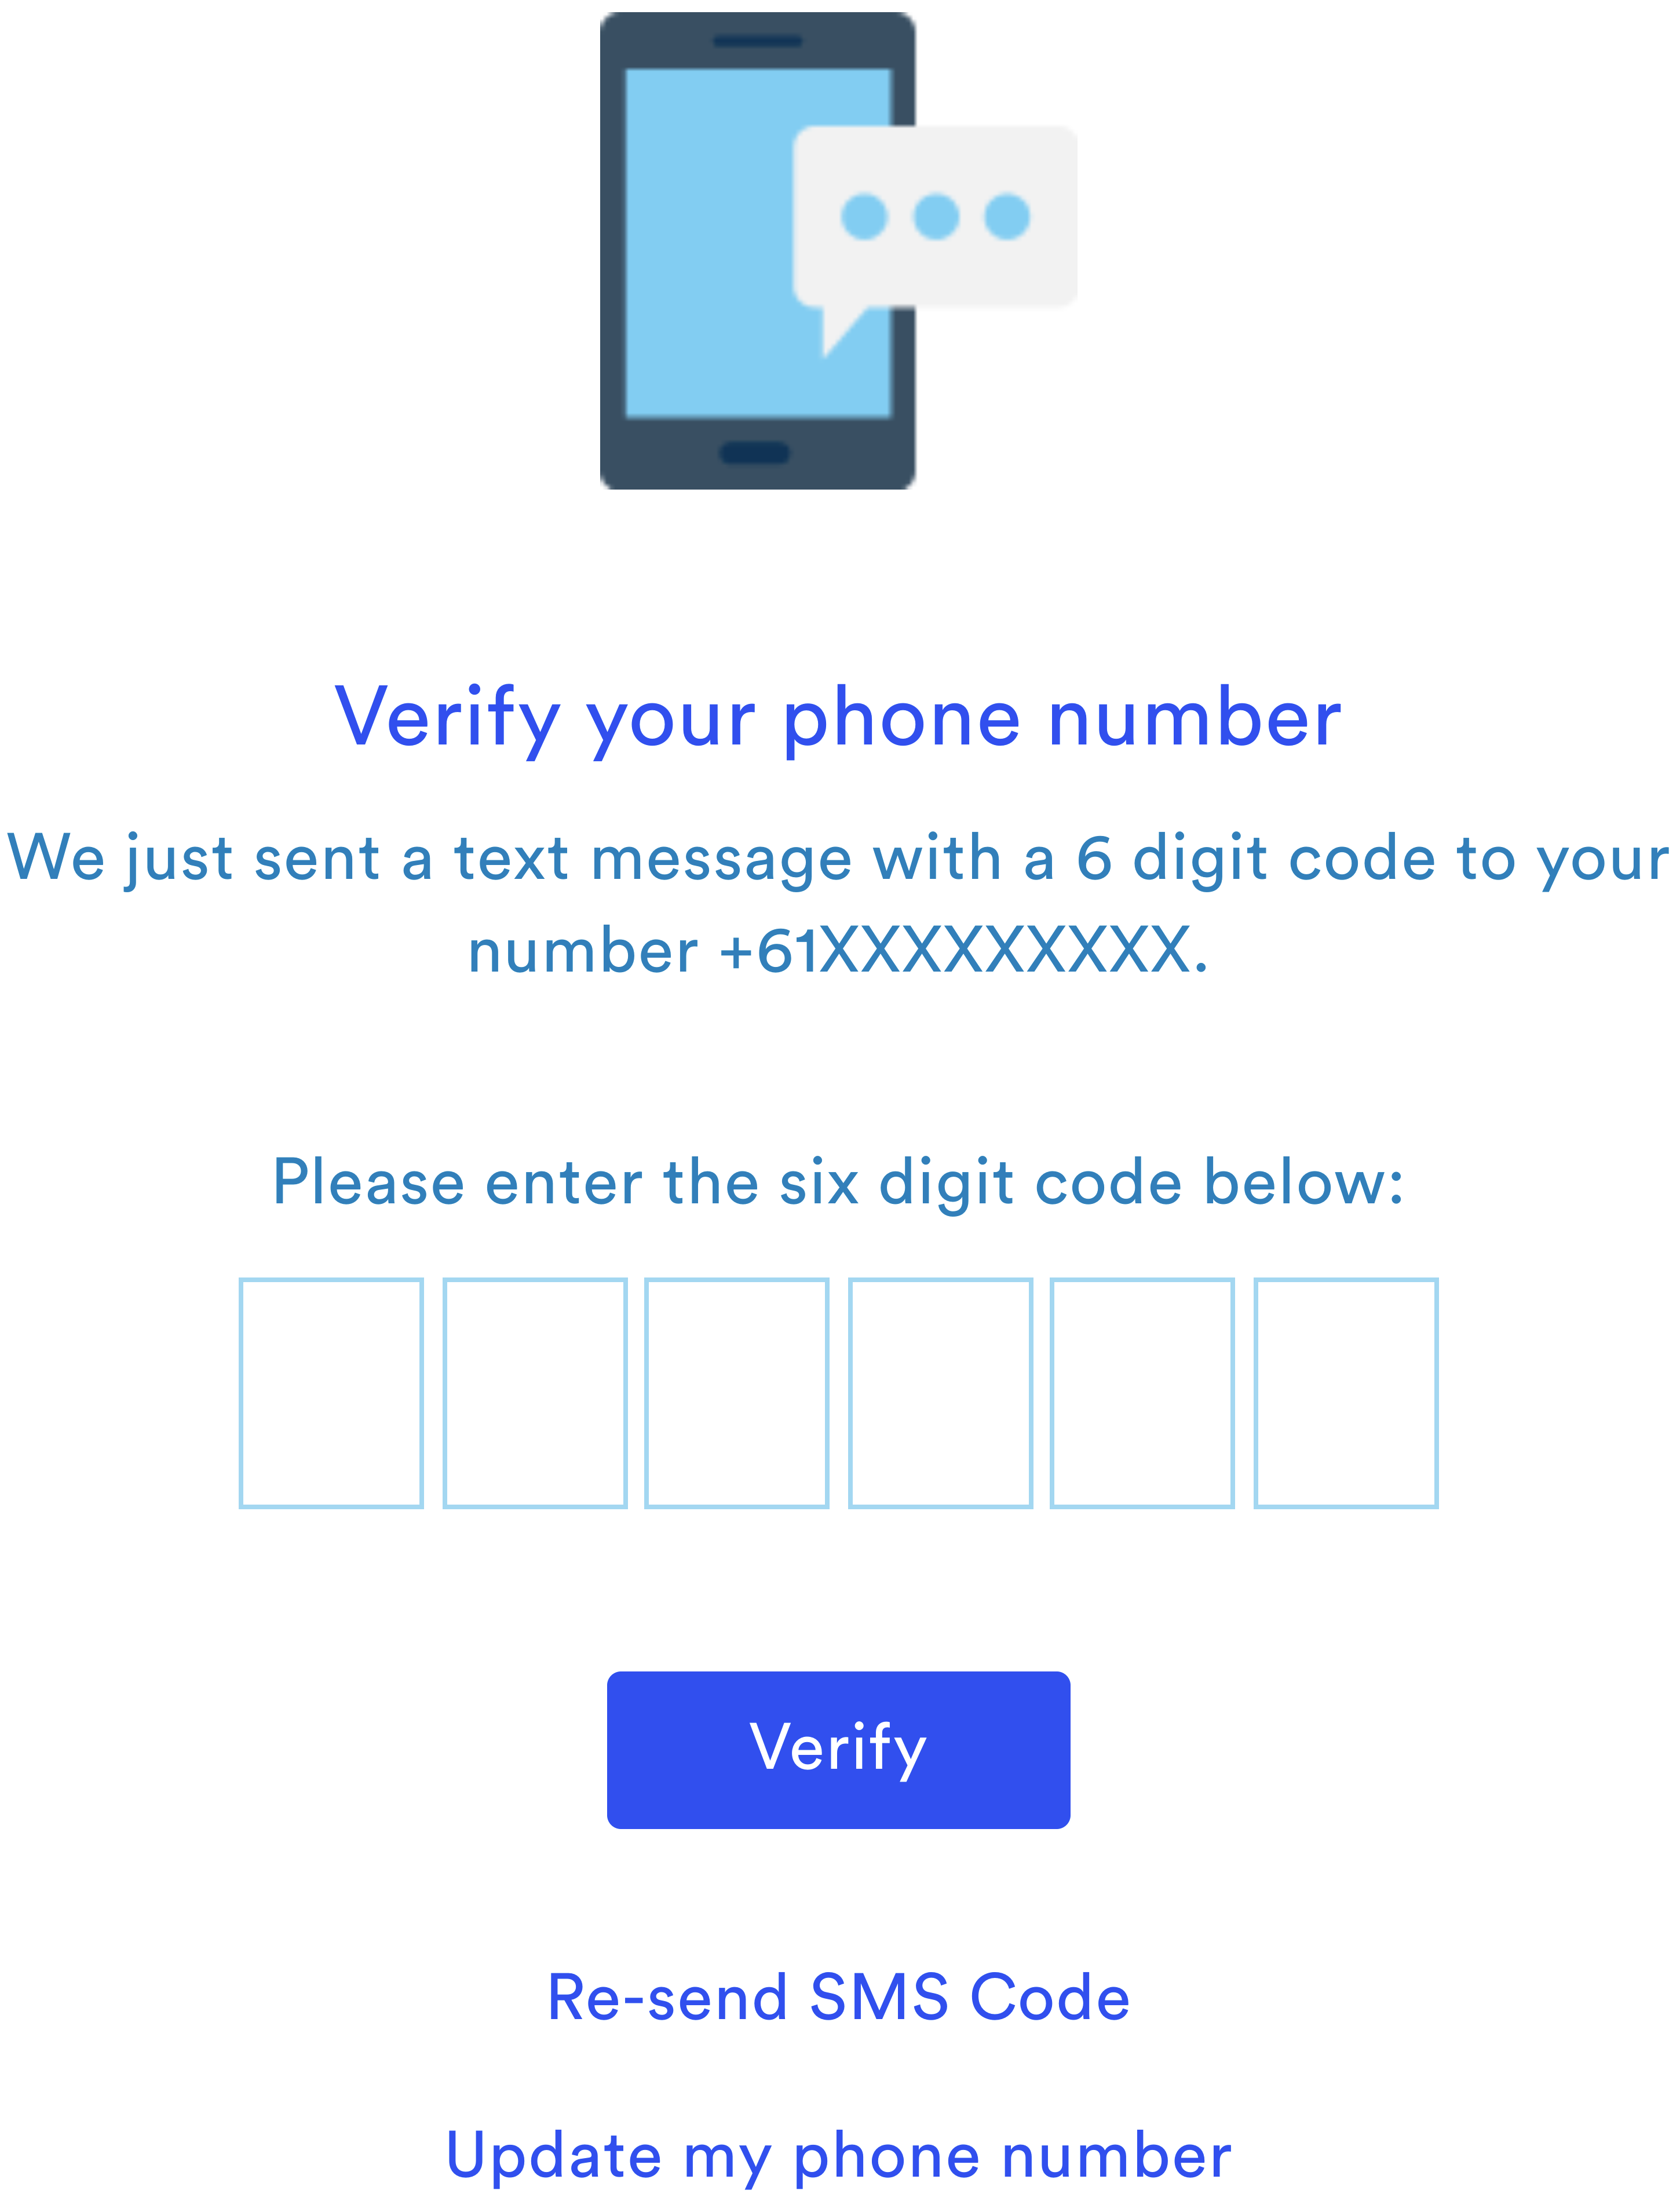 Verify_your_phone_number_v2.png